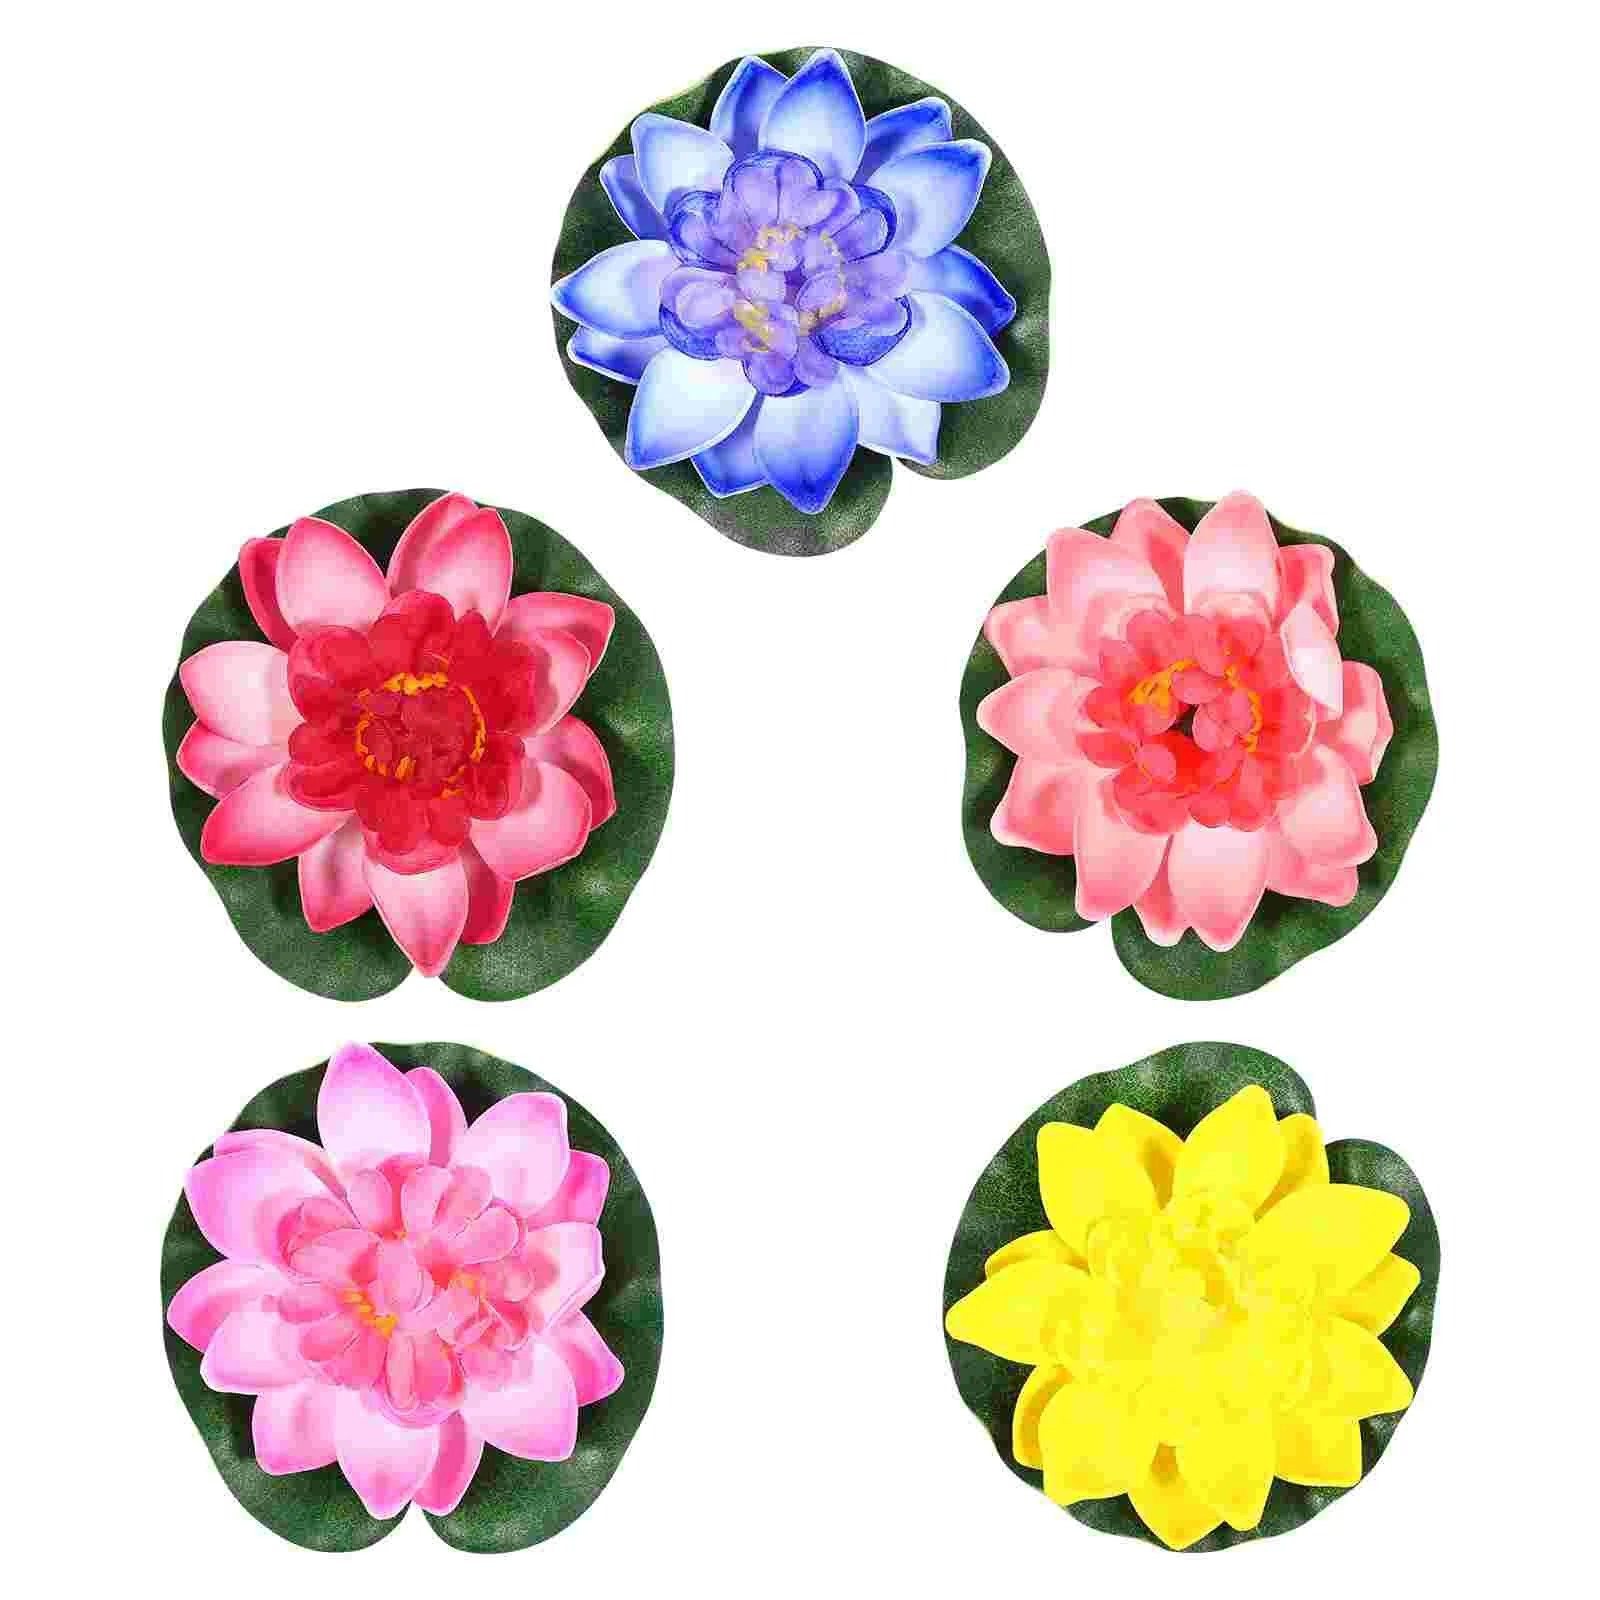 

WINOMO 5Pcs 10CM Fake Lotus Simulated Floating Water Lily Artificial Floating Pond Plants for Decoration